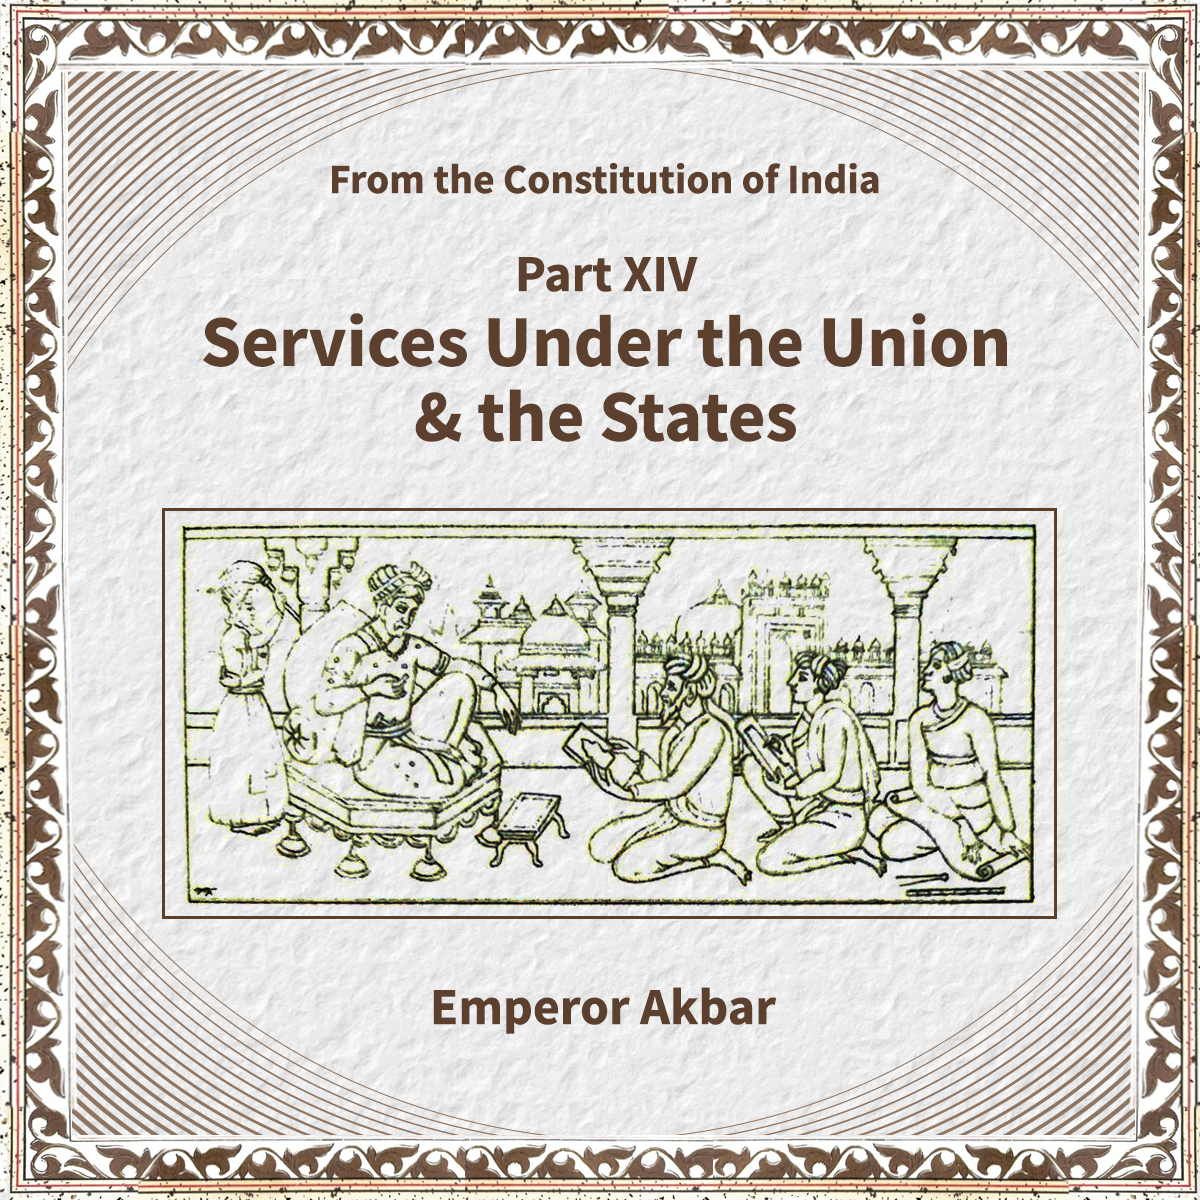 Image of Emperor Akbar and his court is given on the chapter fourteen of the Constitution of India. संविधान के चौदहवें अध्याय पर सम्राट अकबर के दरबार का दृश्य देखा जा सकता है। 13/17 #SamvidhanDiwas